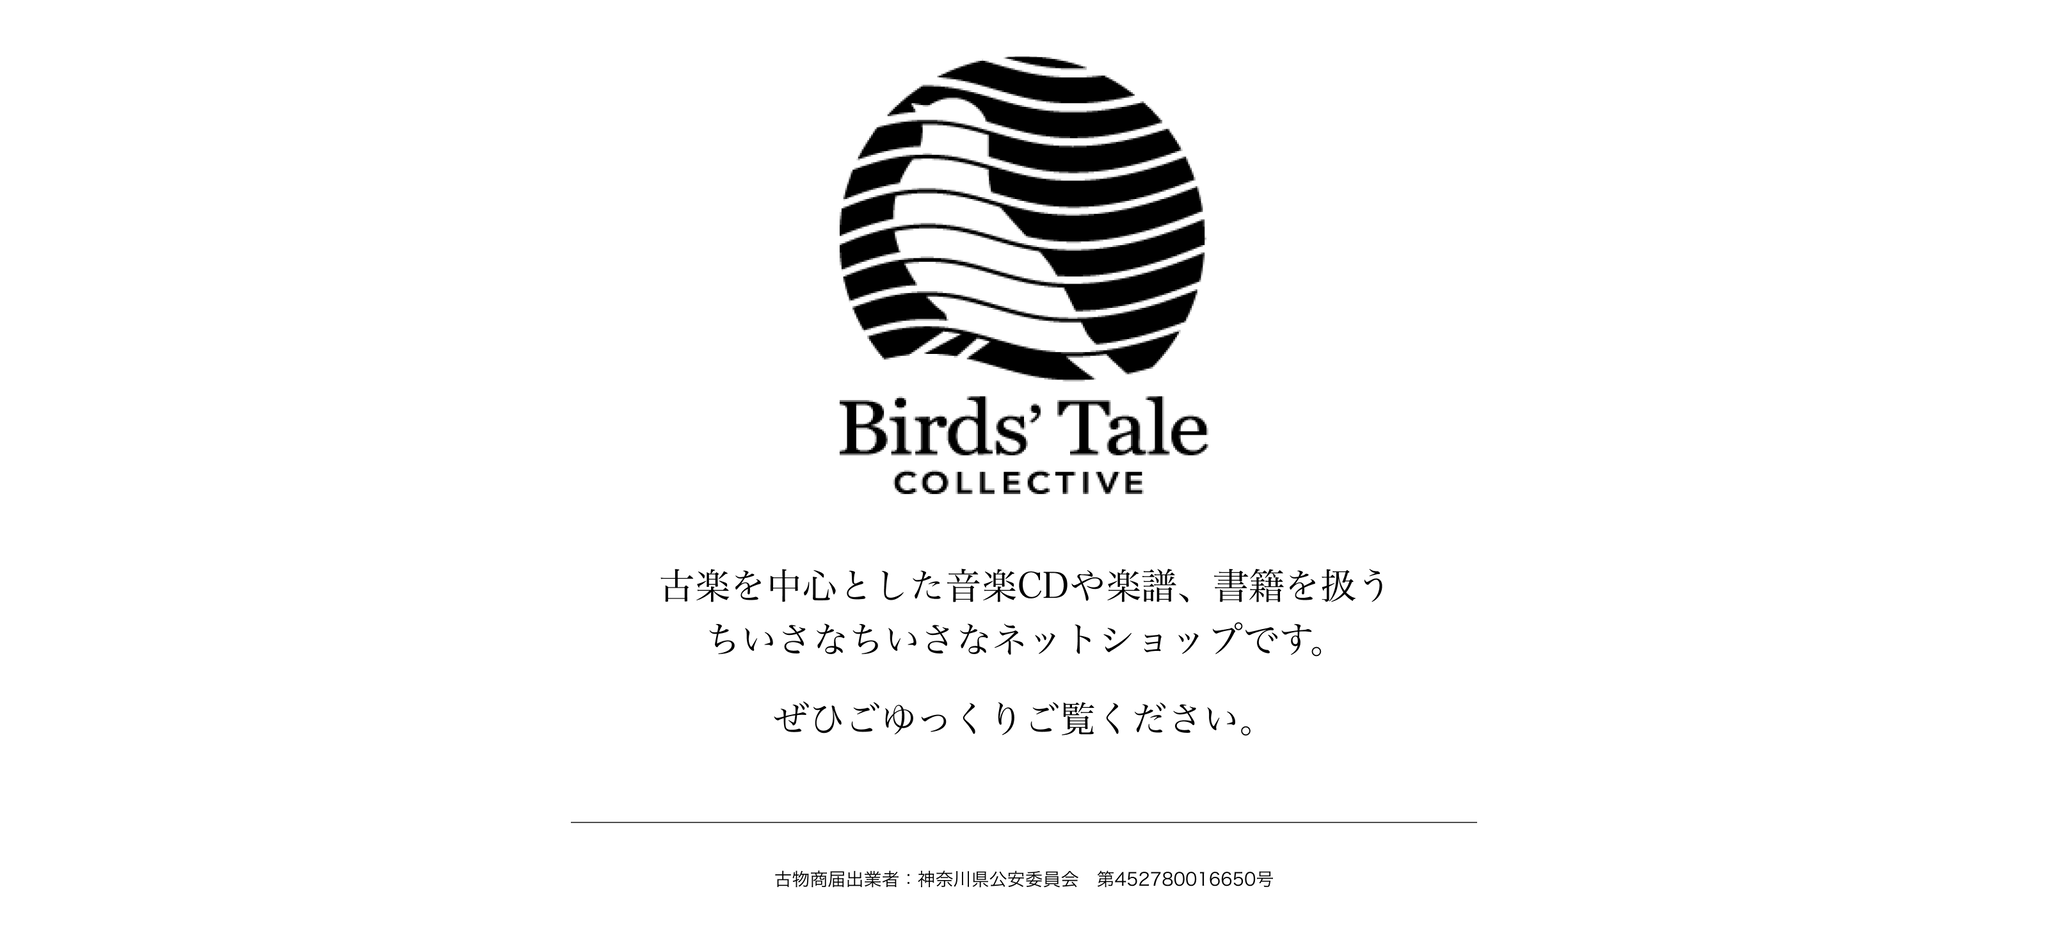 Birds' Tale Collective